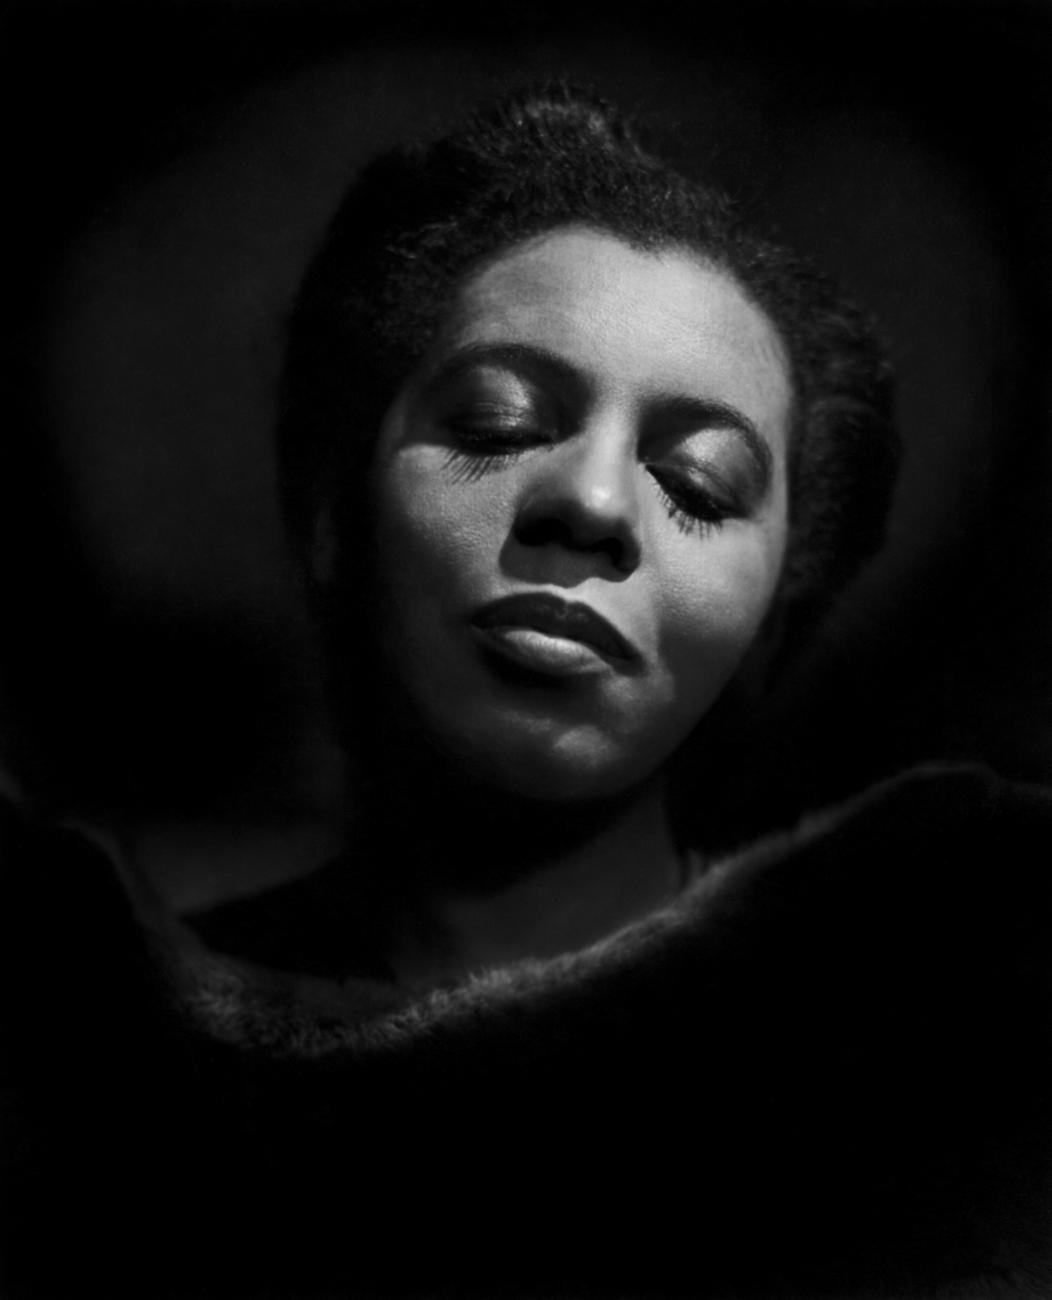 Black and white portrait of a woman with her eyes closed.